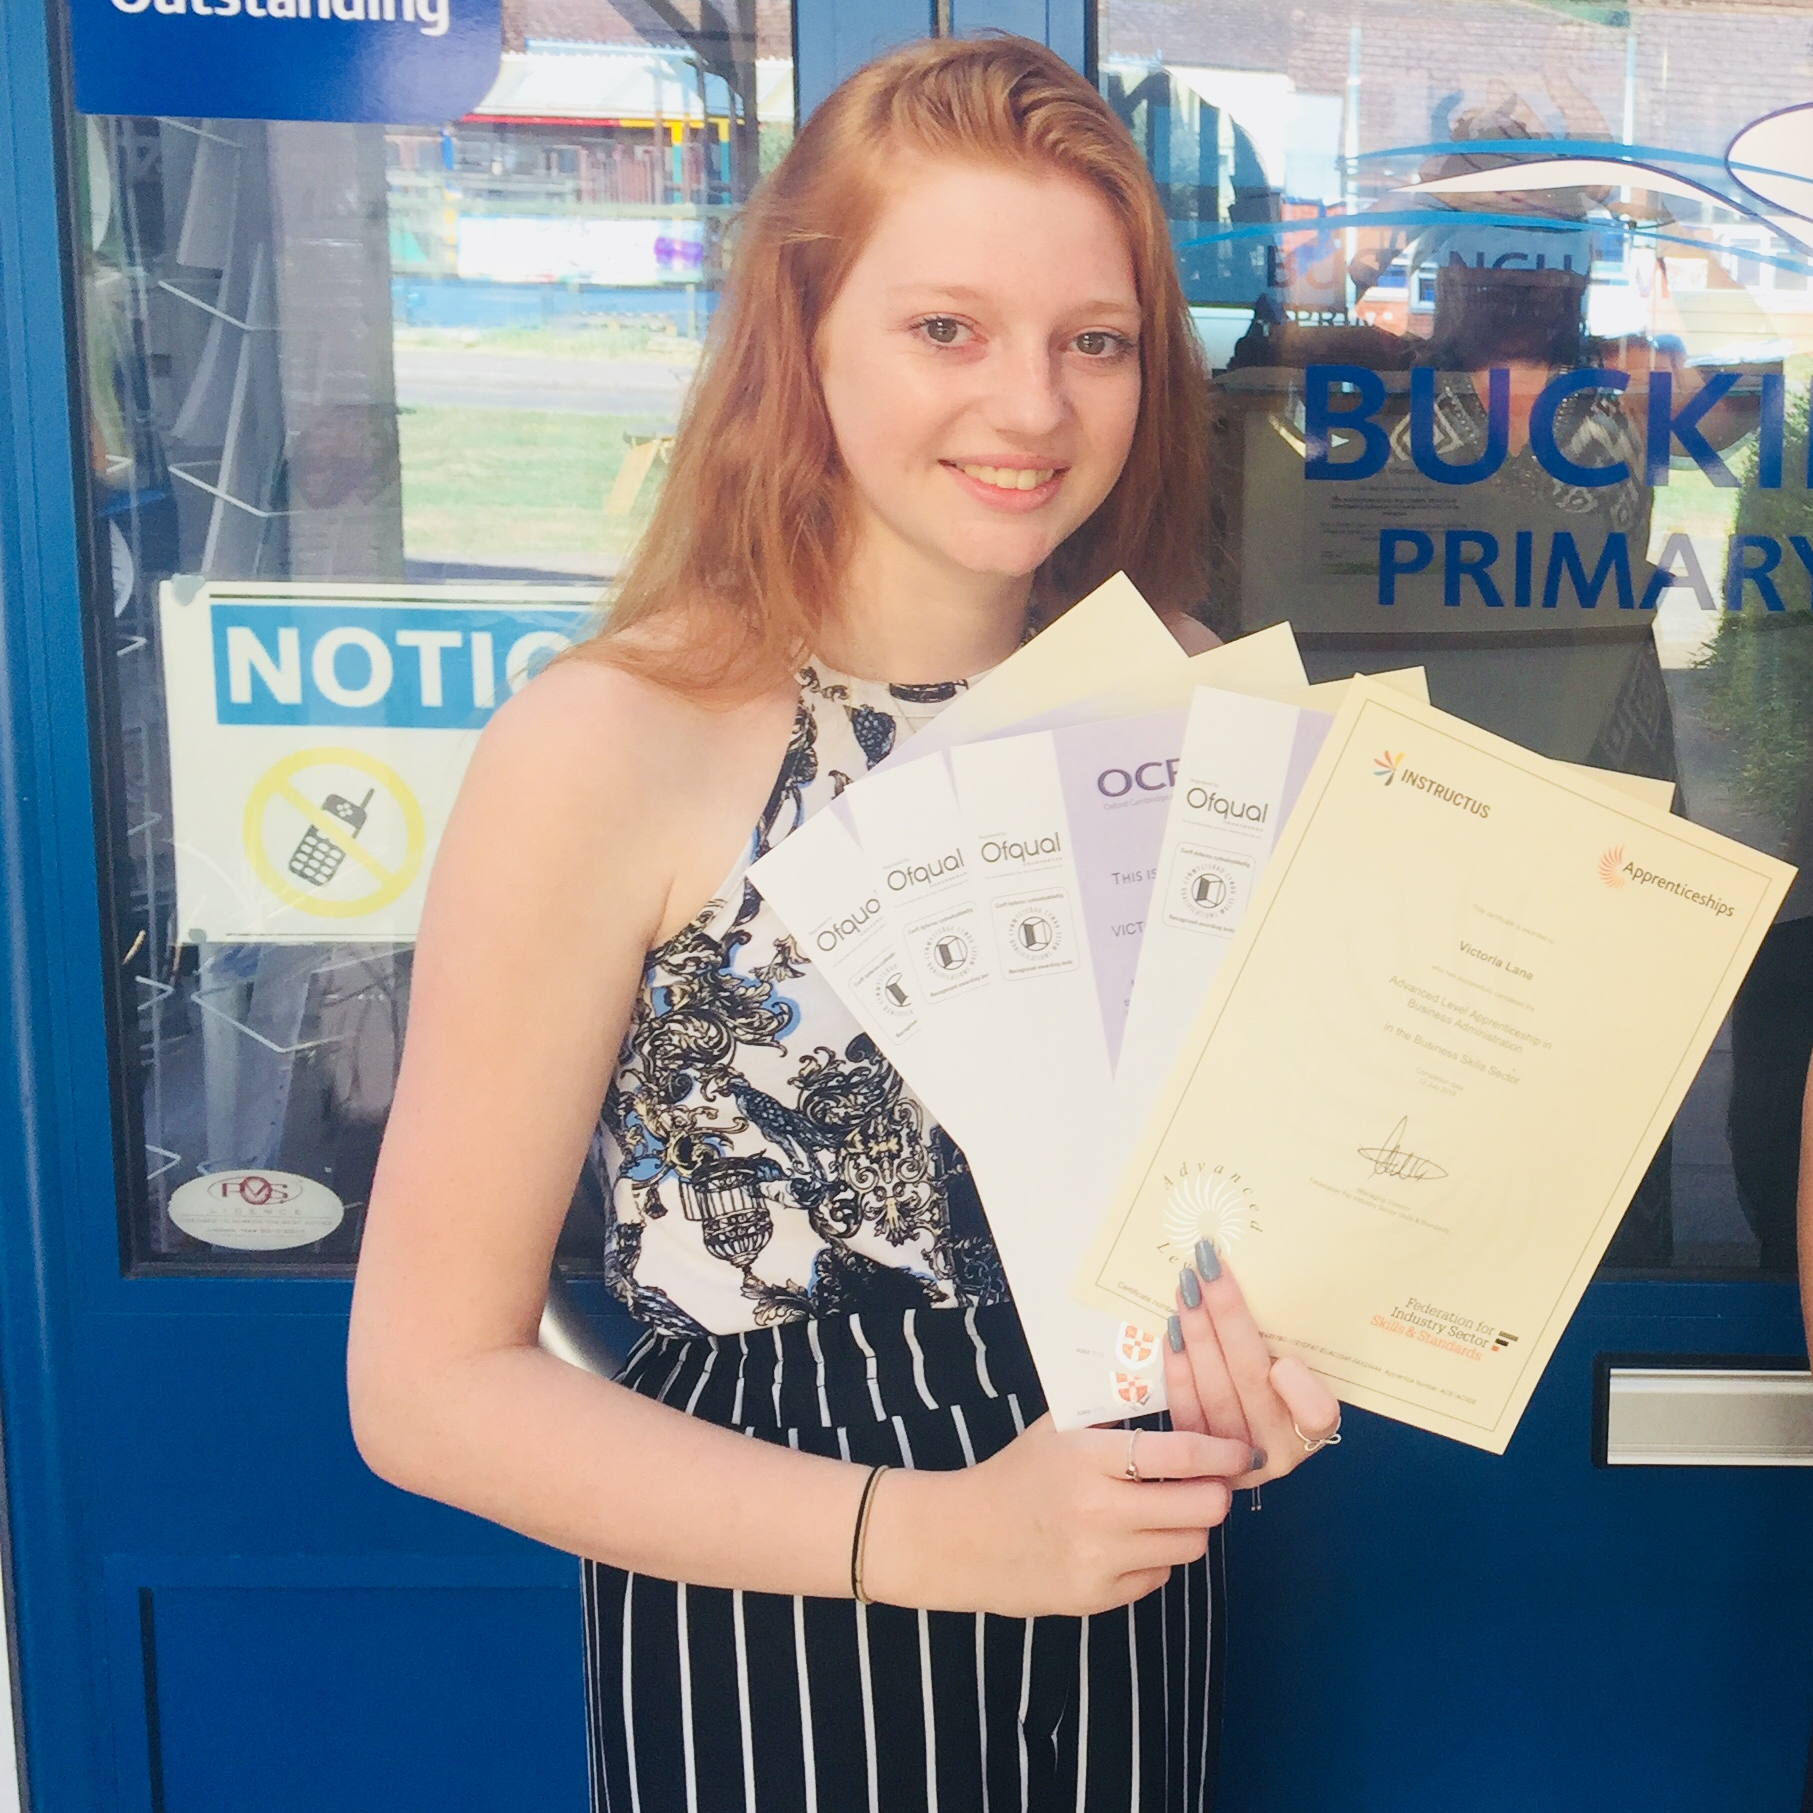 Girl with red hair holding certificates outside a door